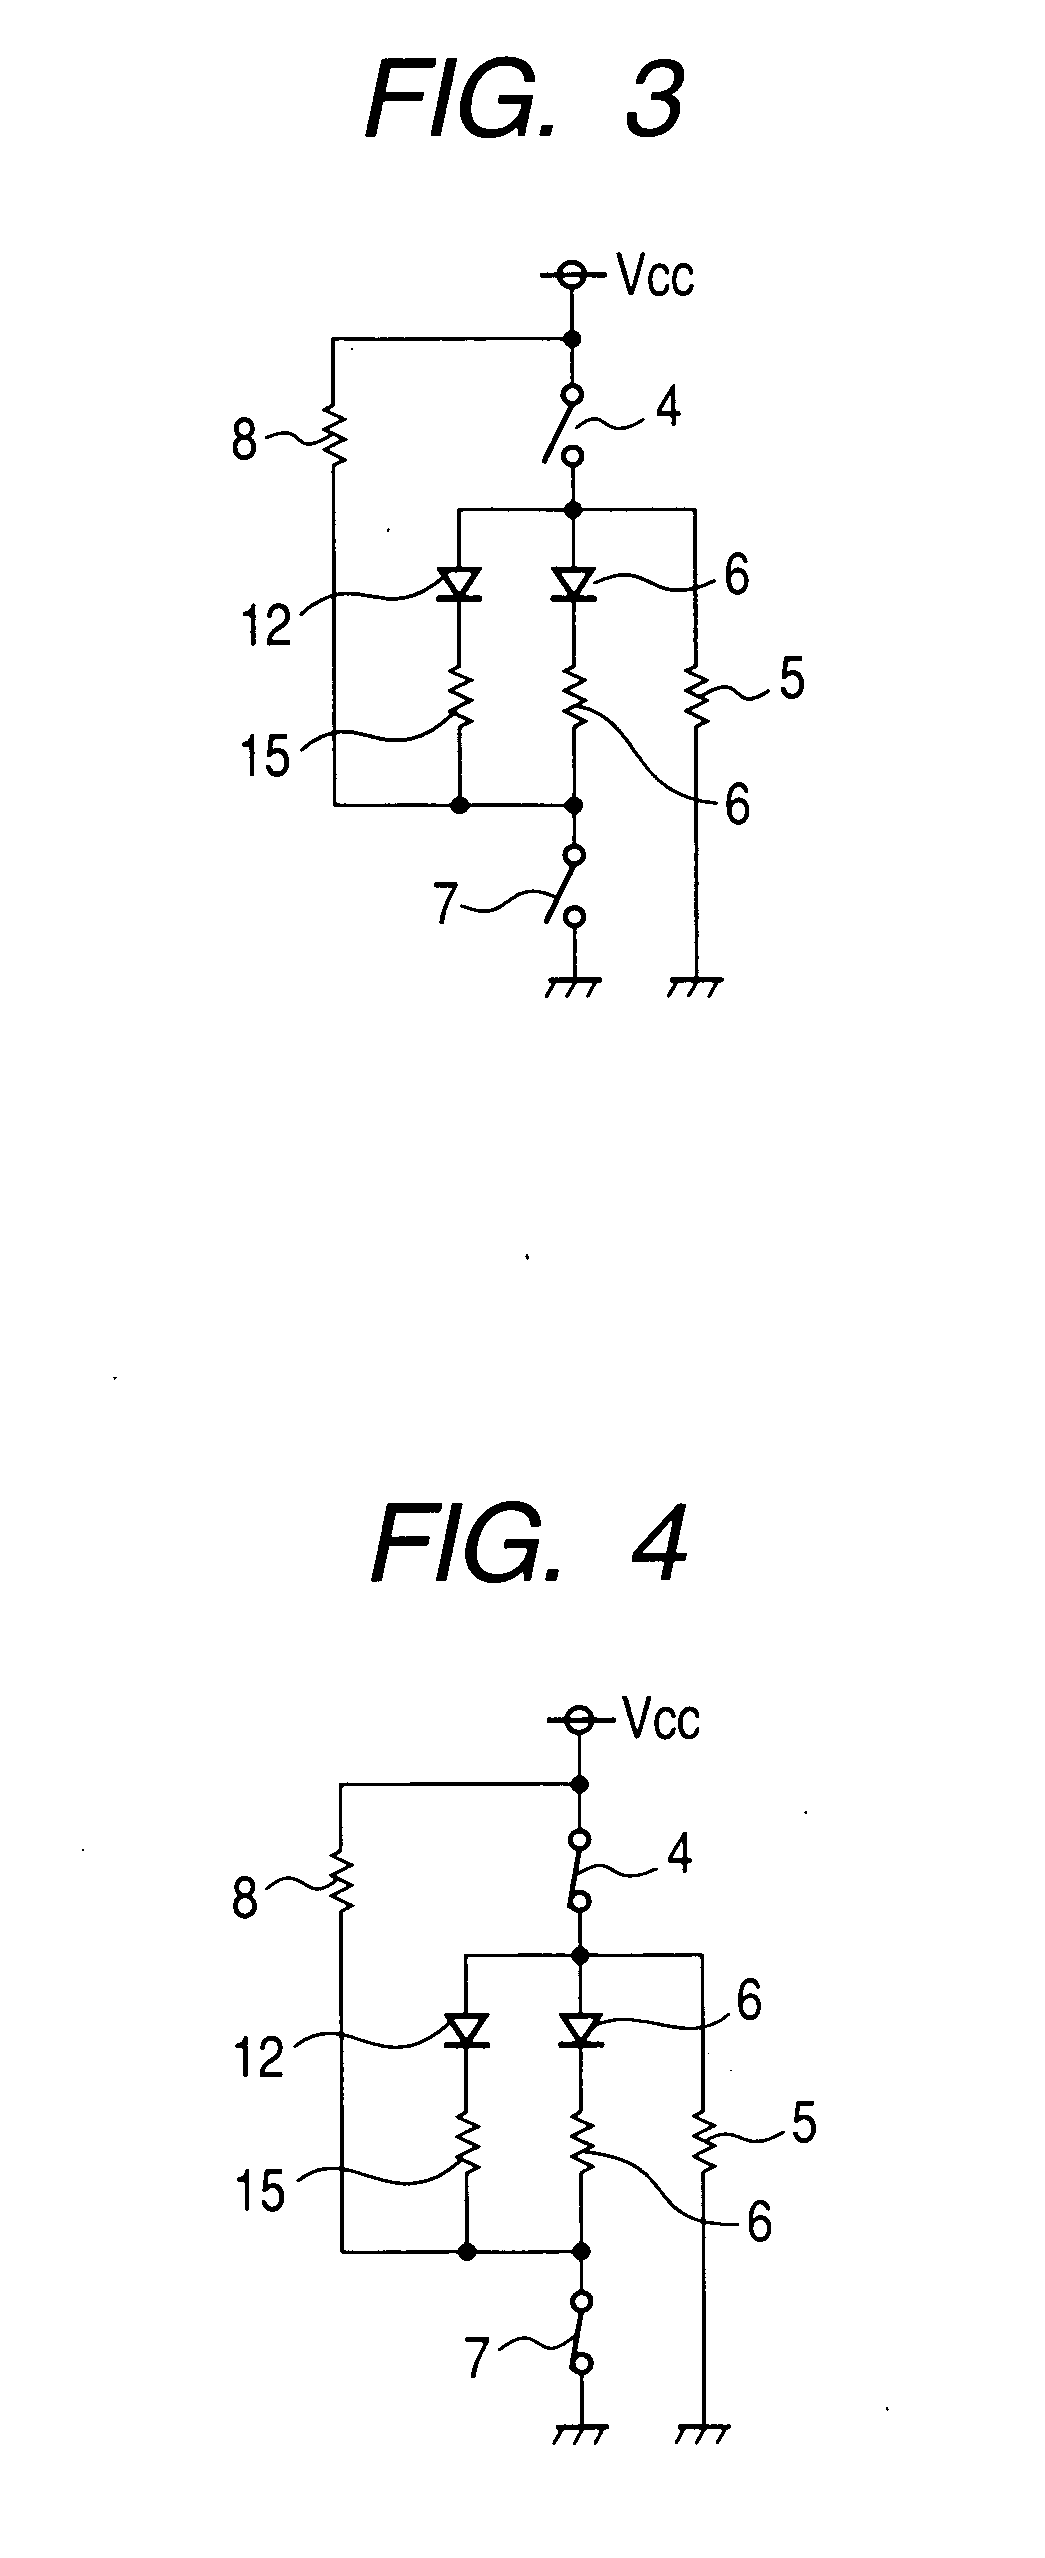 Band switchable type tuning circuit of television signal